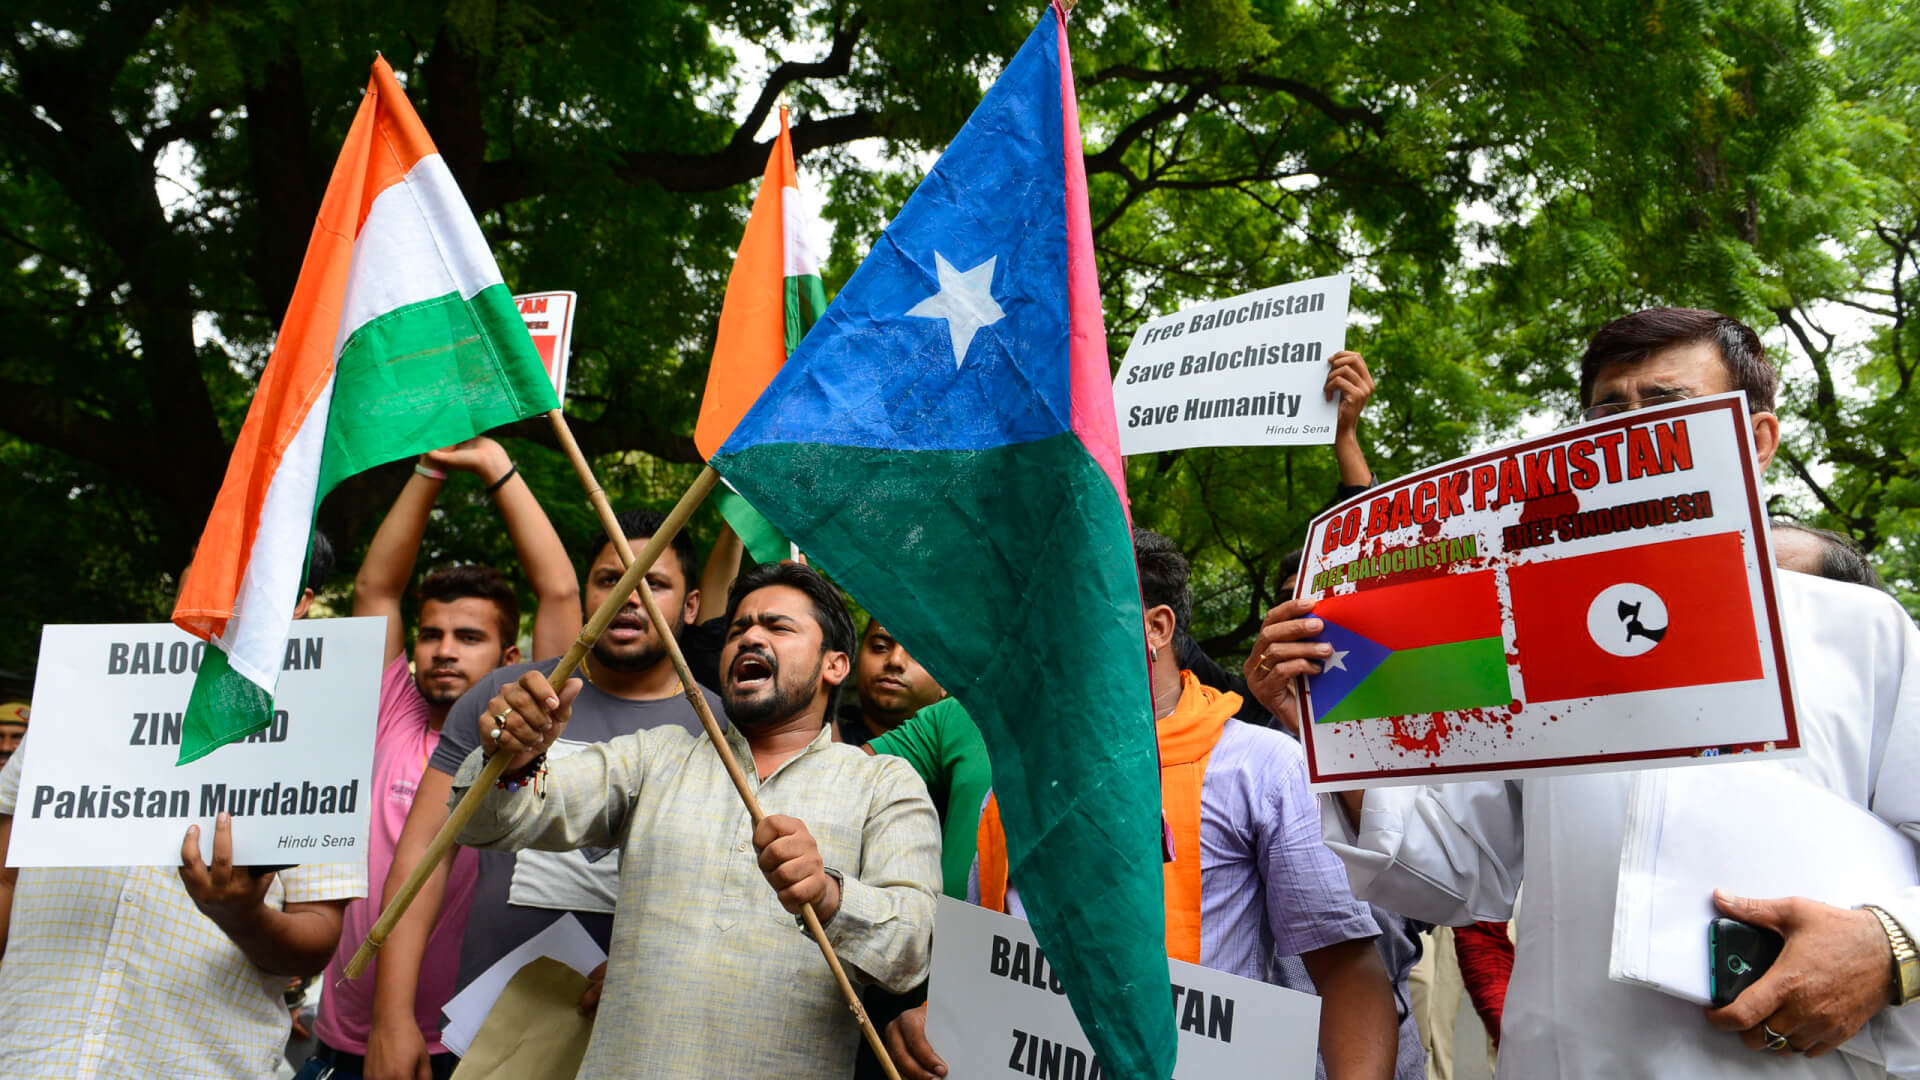 Anti-Pakistan Sentiments Rise in Balochistan, Questions Raised About Forced Disappearances